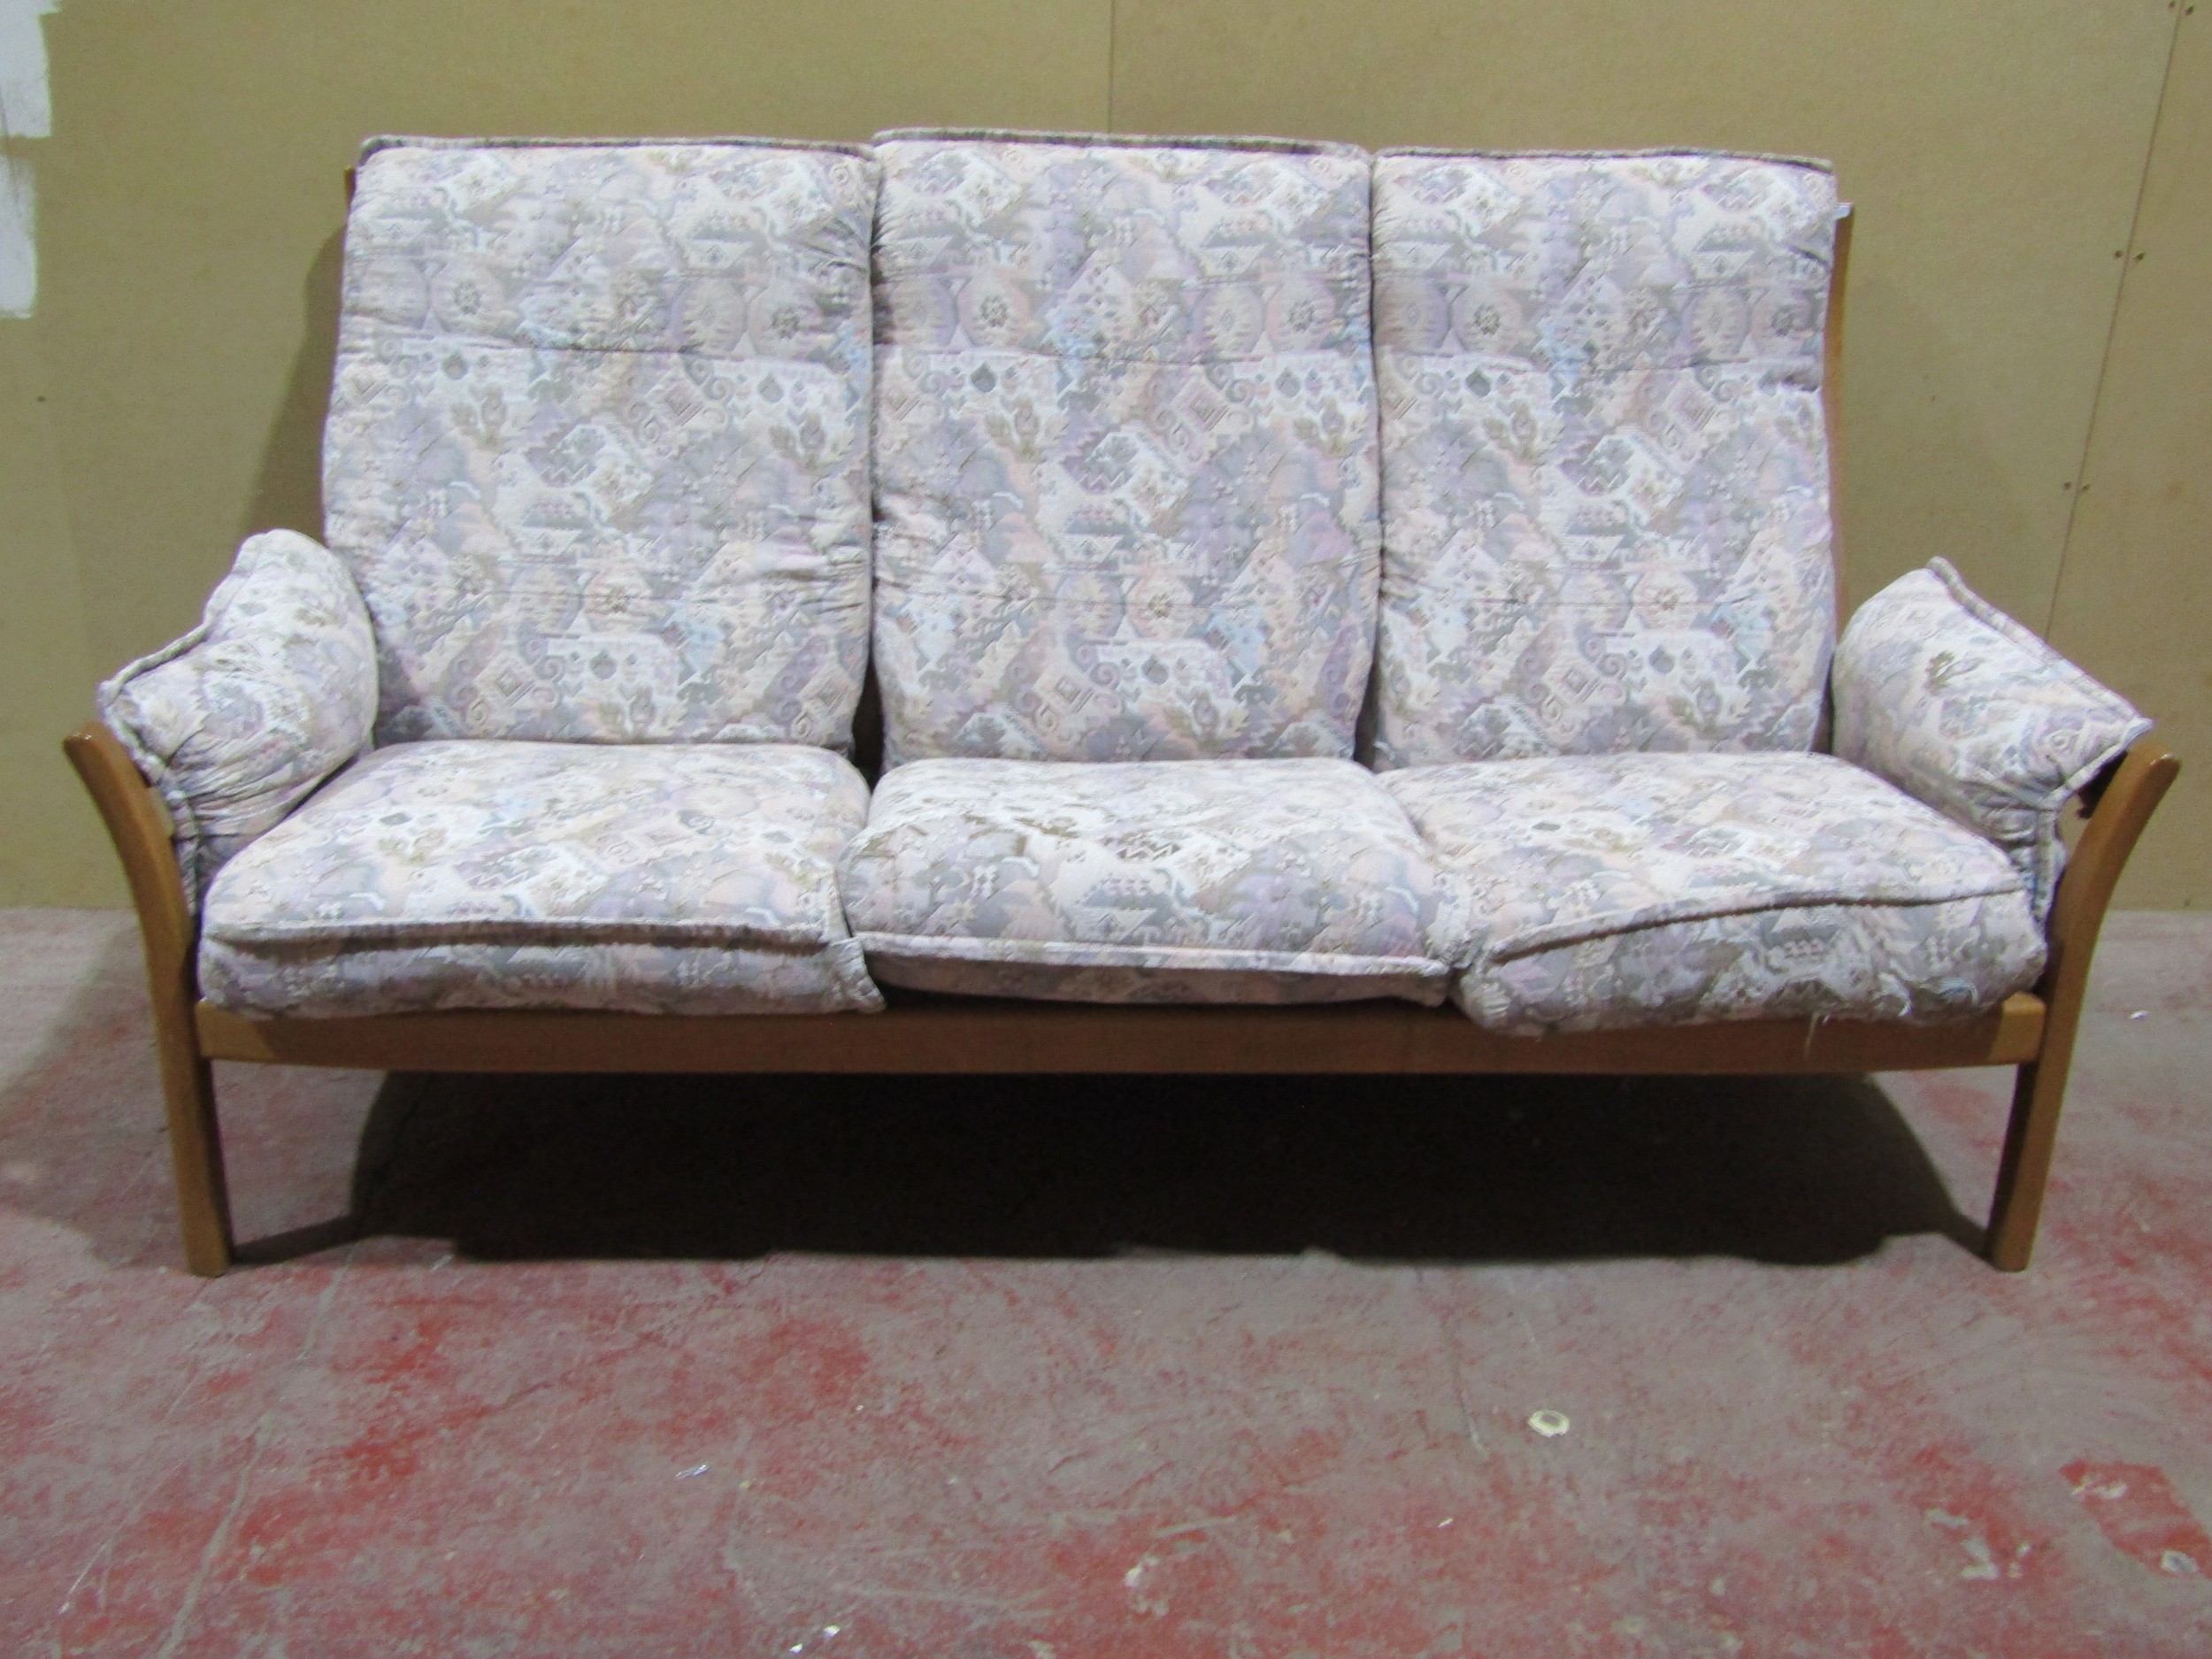 A pale Ercol three seat sofa with a pale coloured upholstery and blonde wood frame